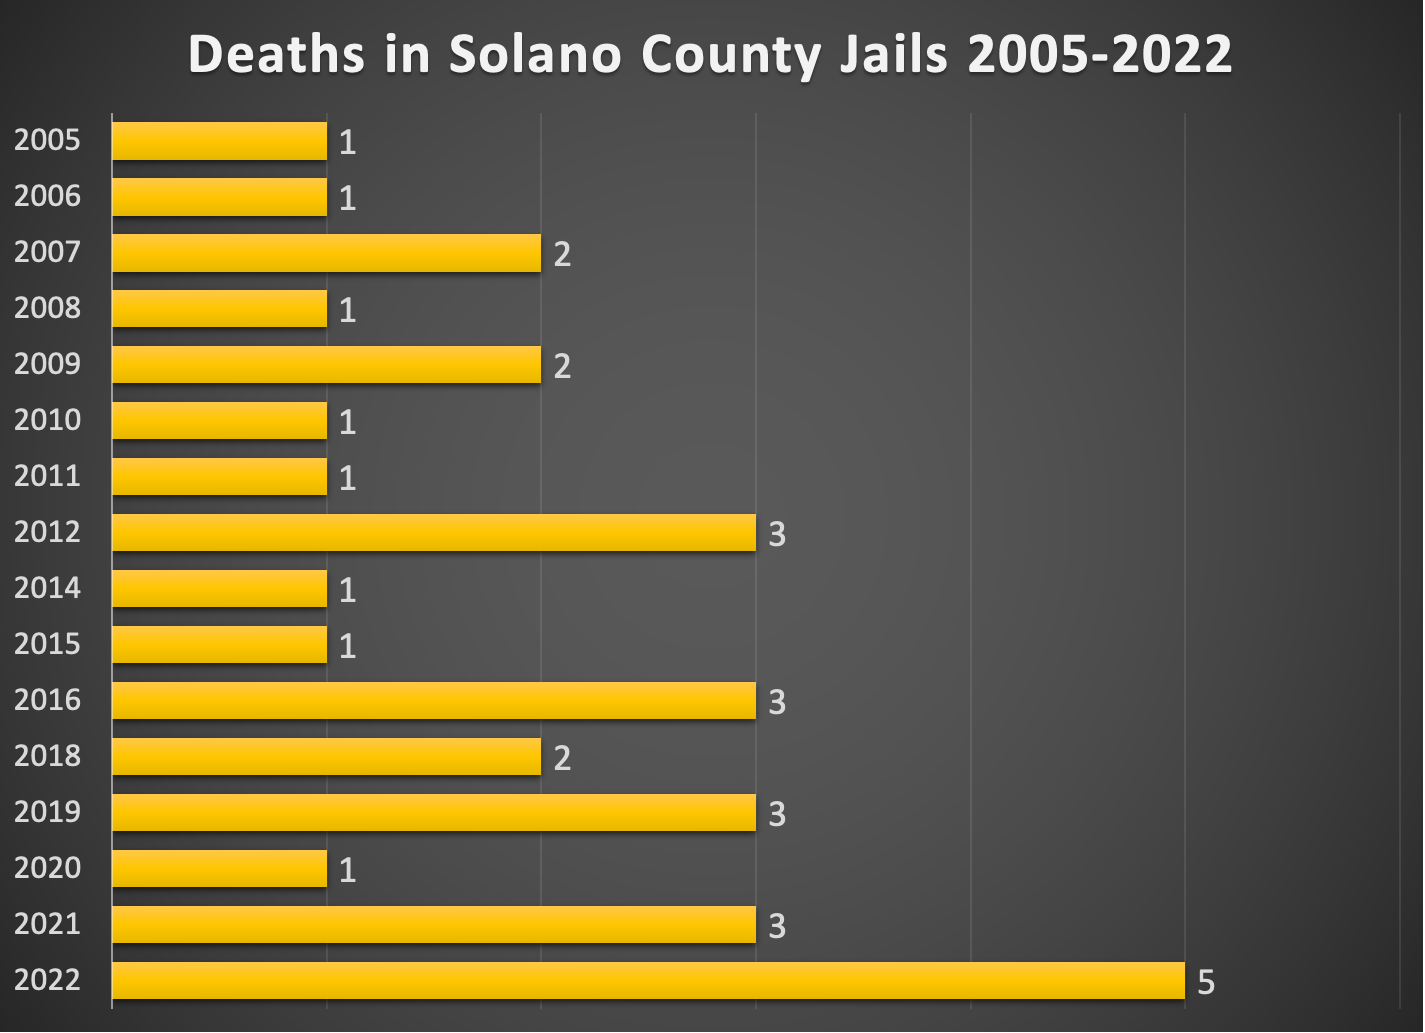 Deaths in Solano County jails, 2005-2022. 